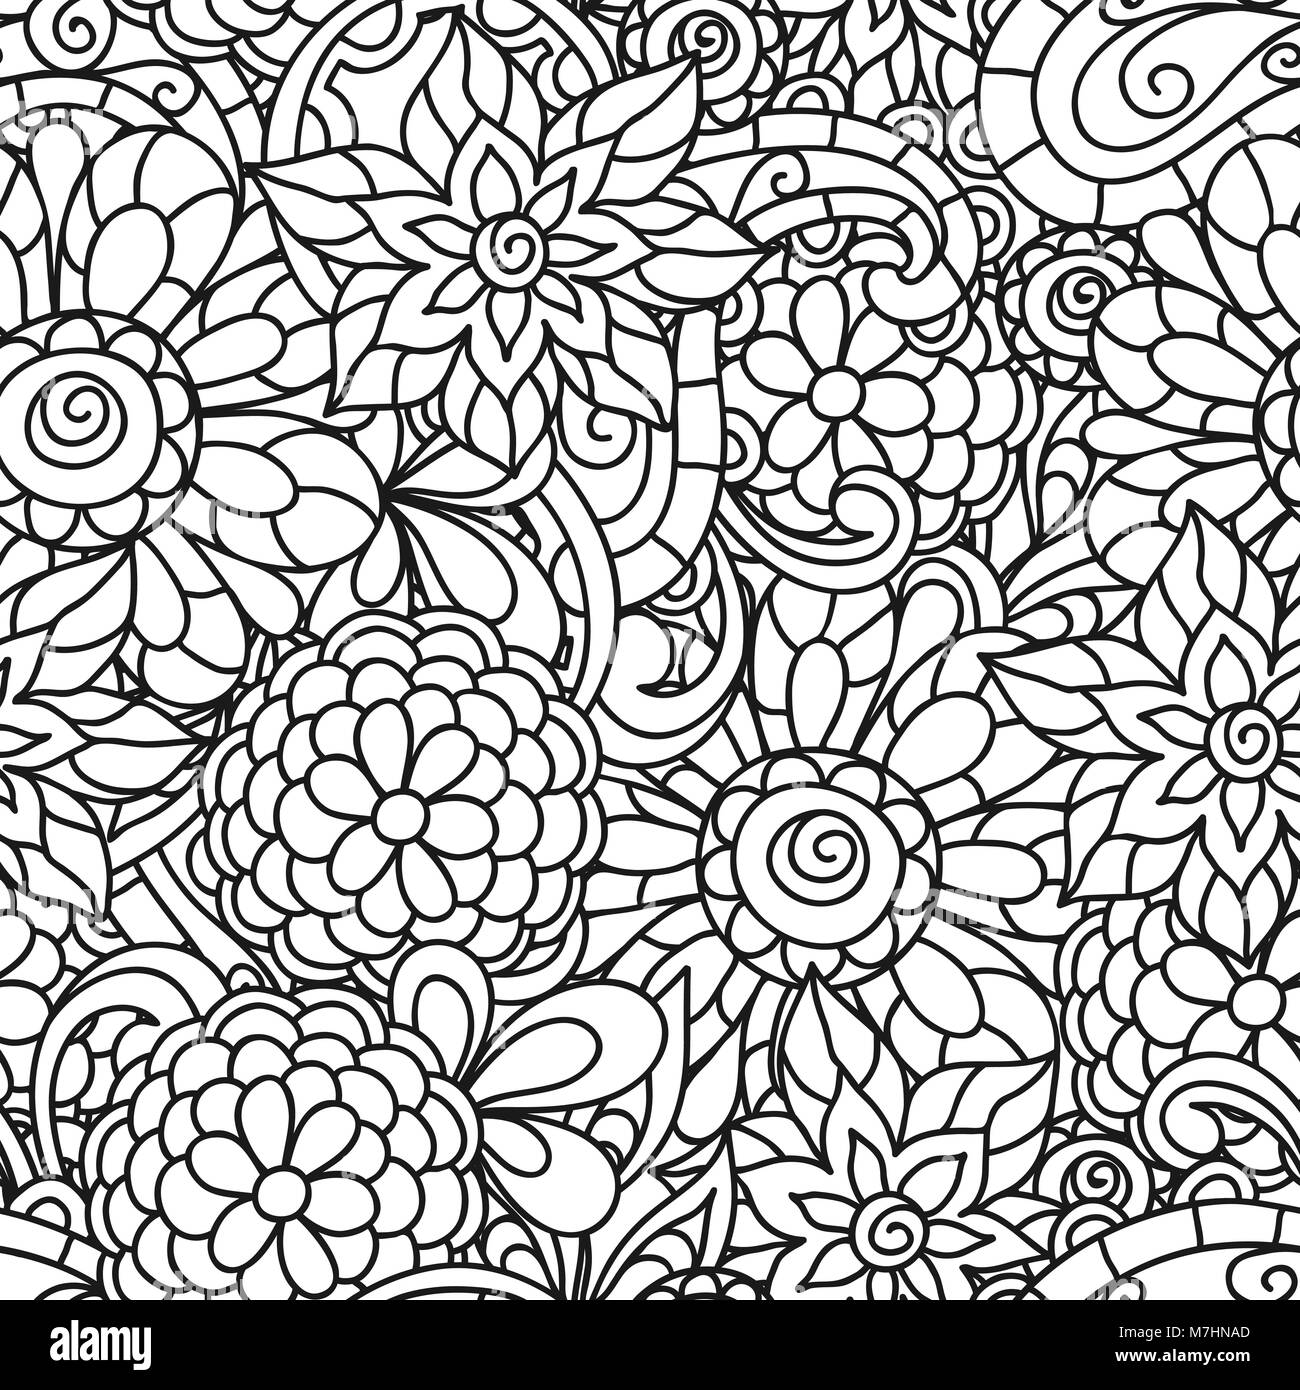 Cute Nature Coloring Book Seamless Vector Pattern Design